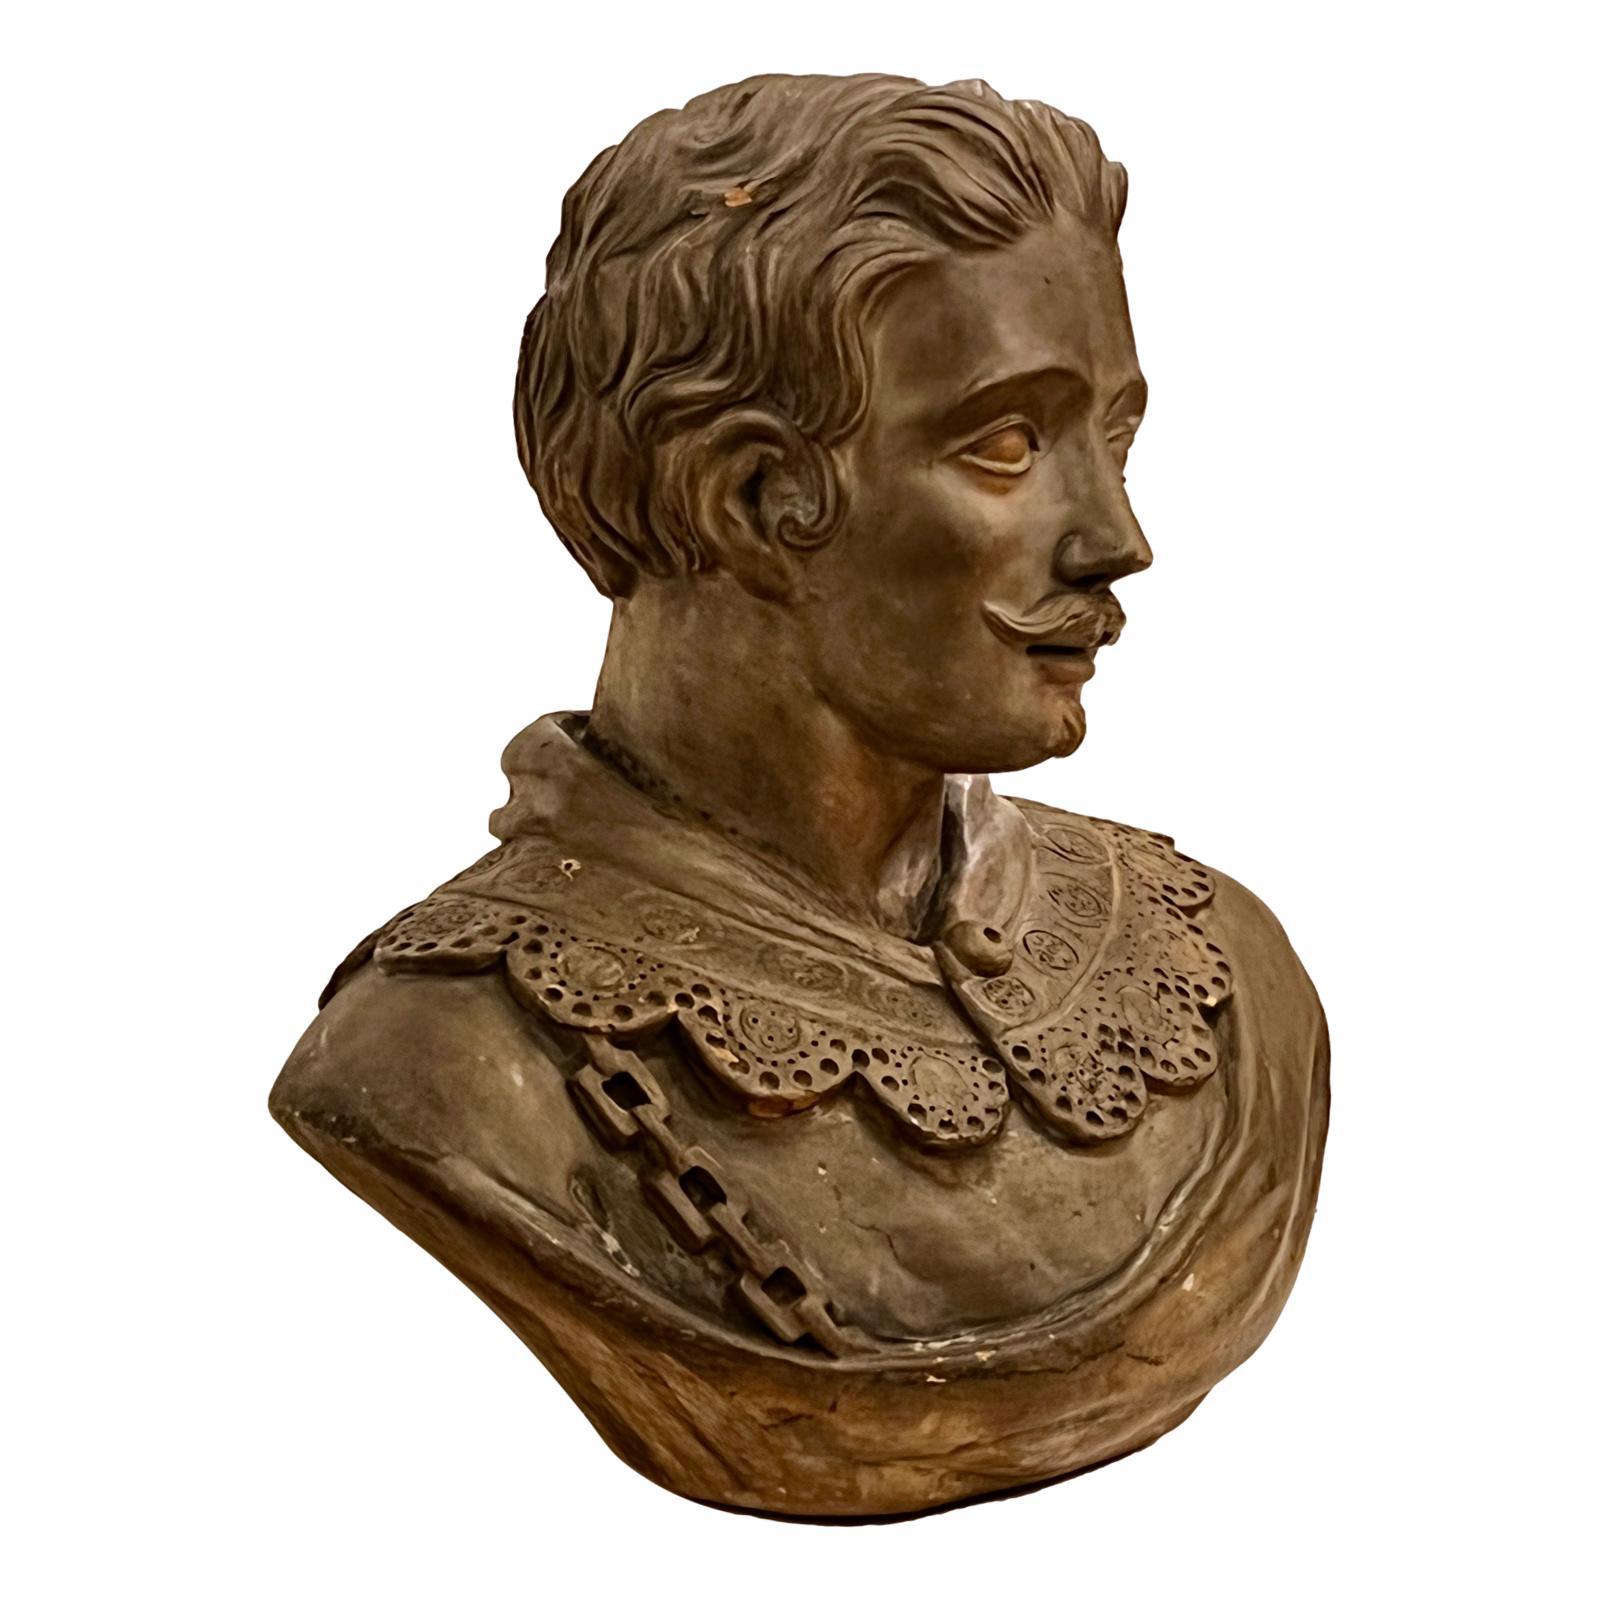 A circa 1920's French terracotta bust of a gentleman.

Measurements:
Height: 17